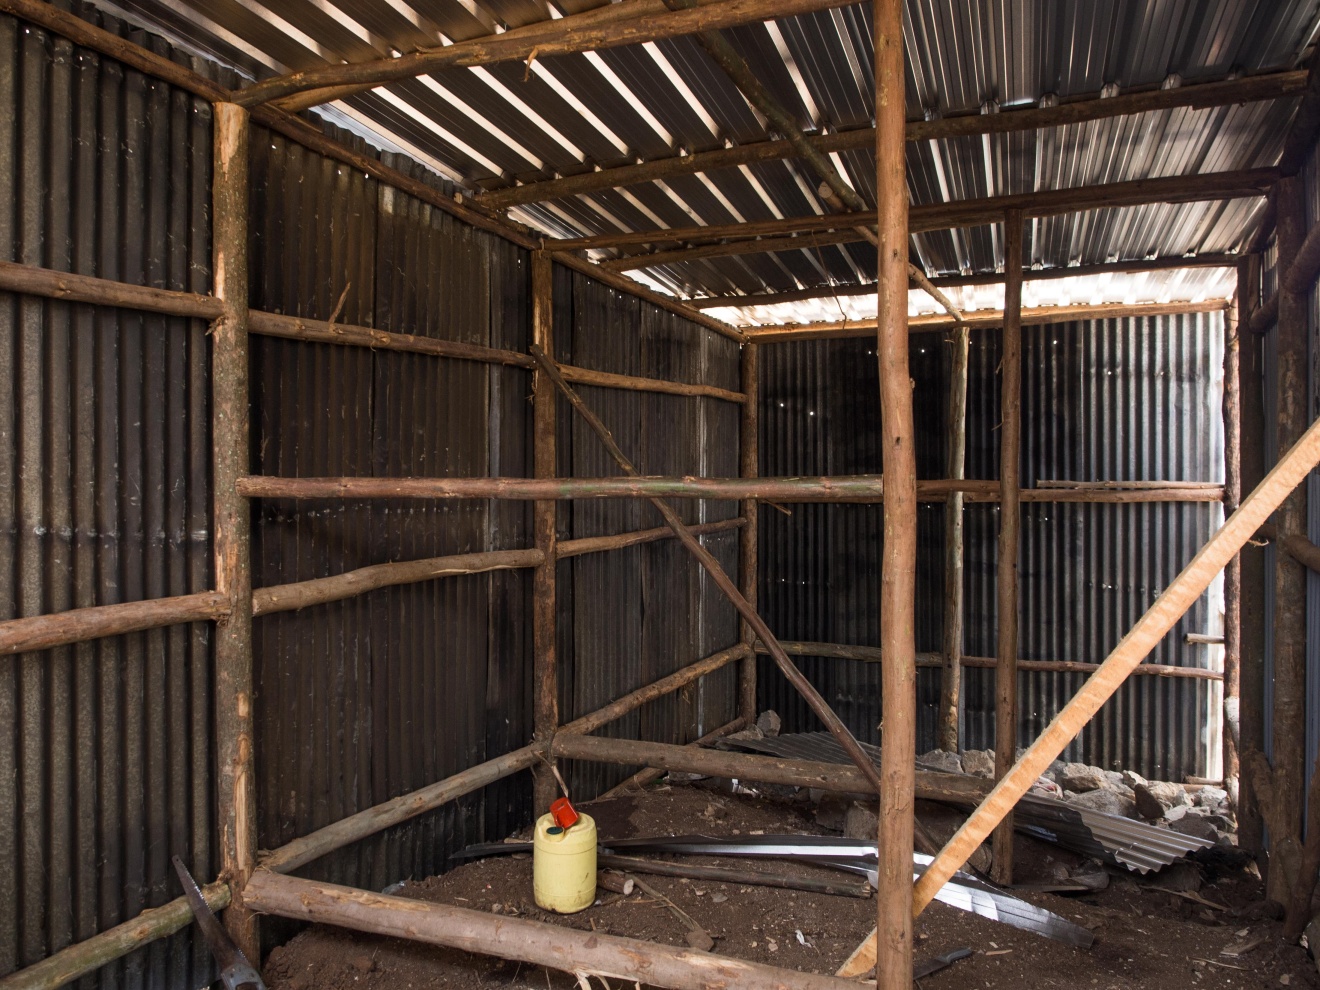 The interior of a shack under construction. Here, GI sheets are used for the walls